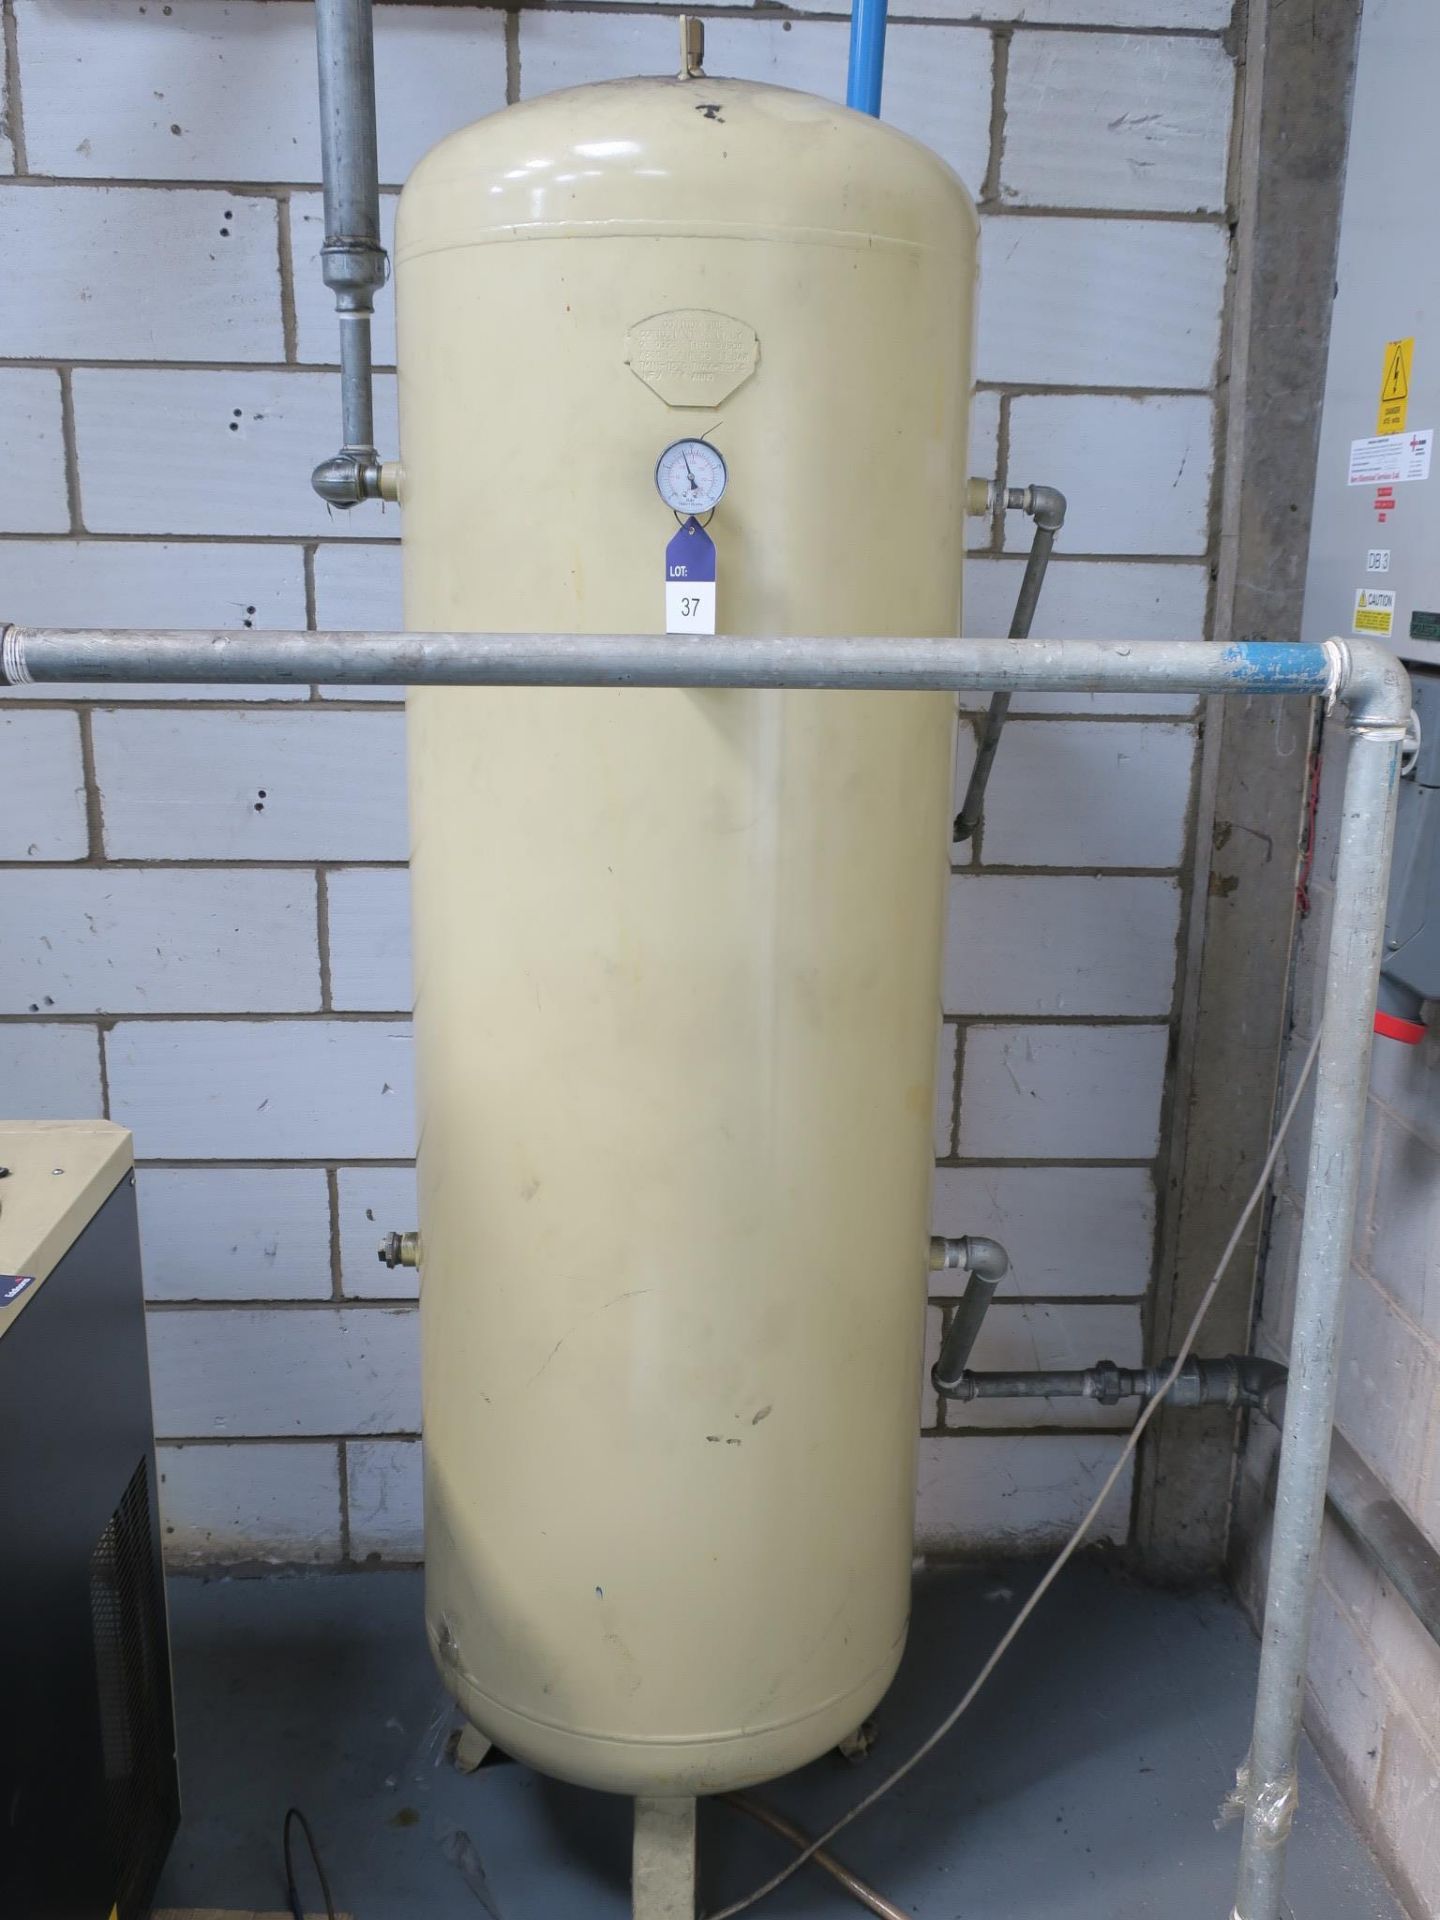 * Vertical 500L Air Receiver. This lot is buyer to remove. Please note that a Risk Assessment and